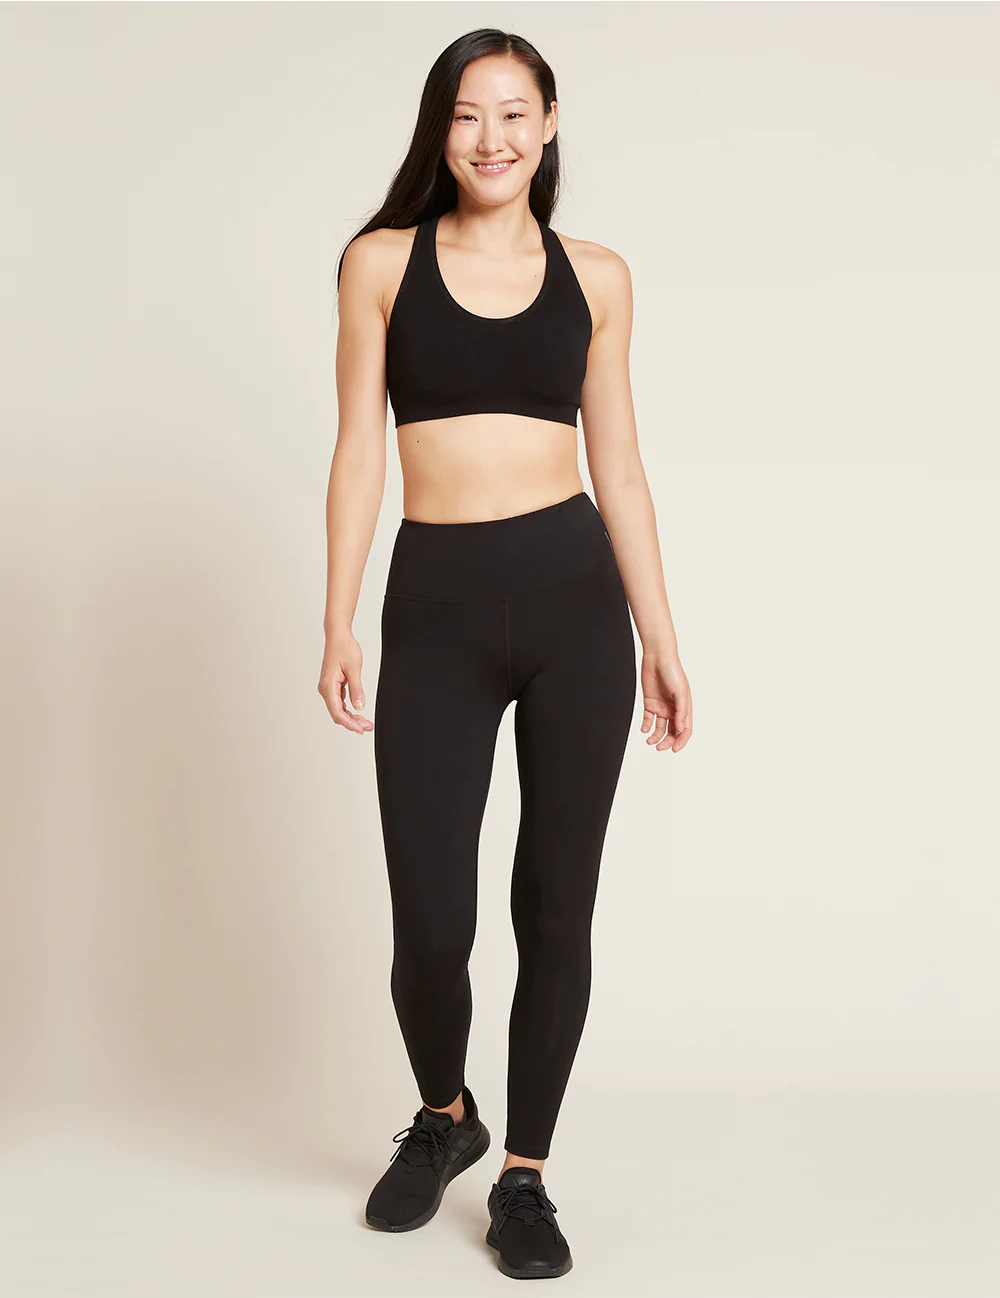 Full-Length Active Tights 2.0 - Black